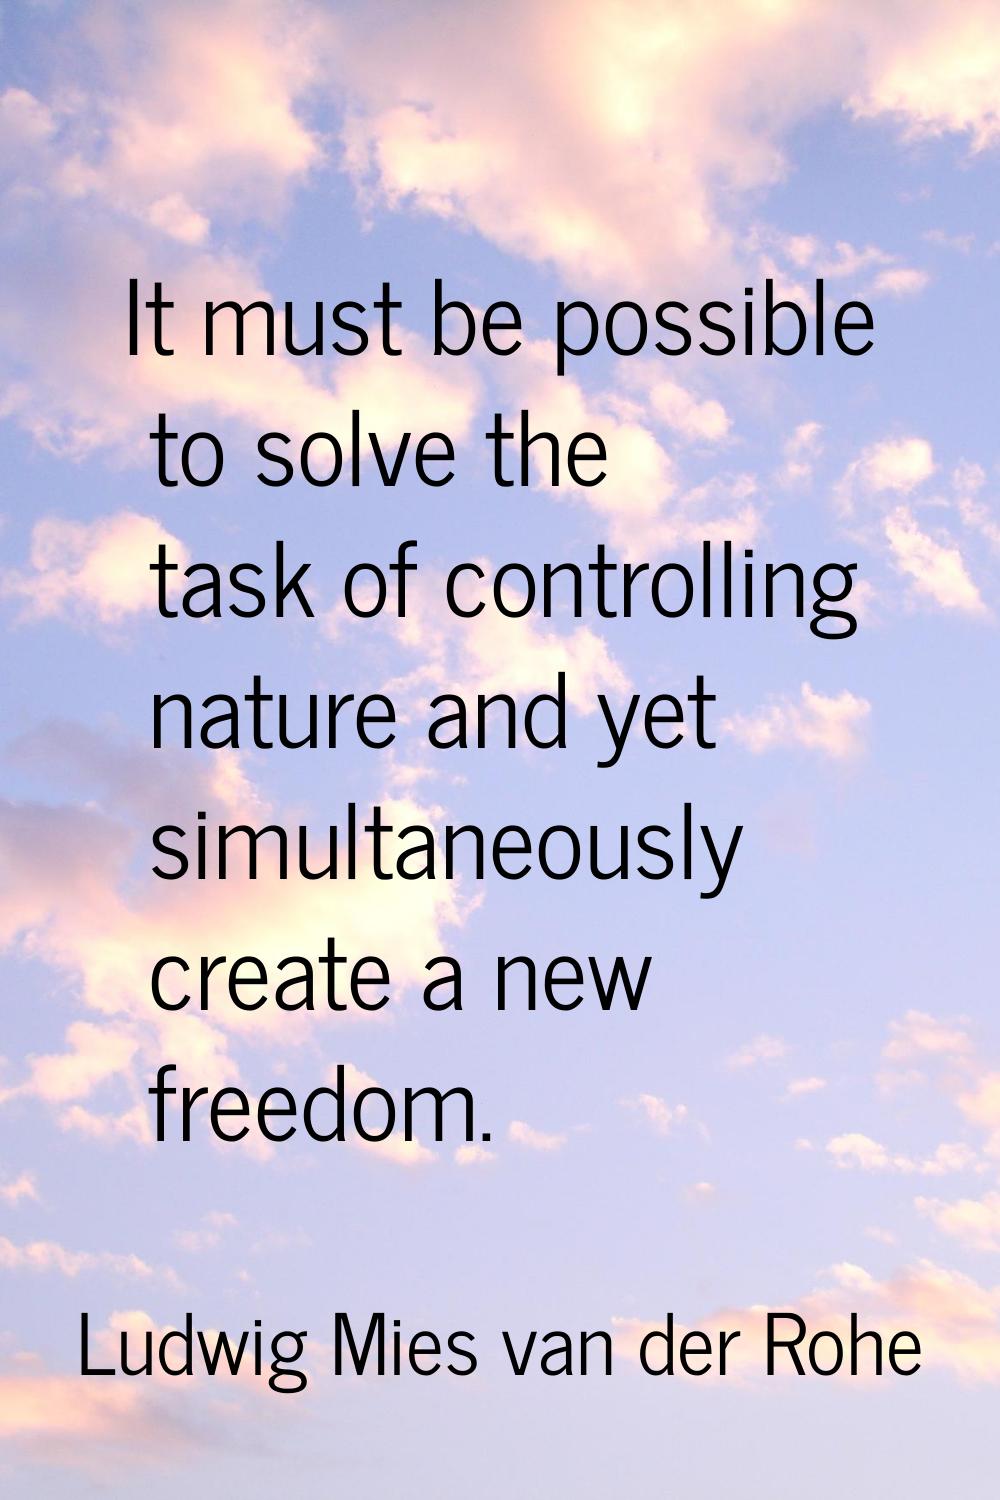 It must be possible to solve the task of controlling nature and yet simultaneously create a new fre